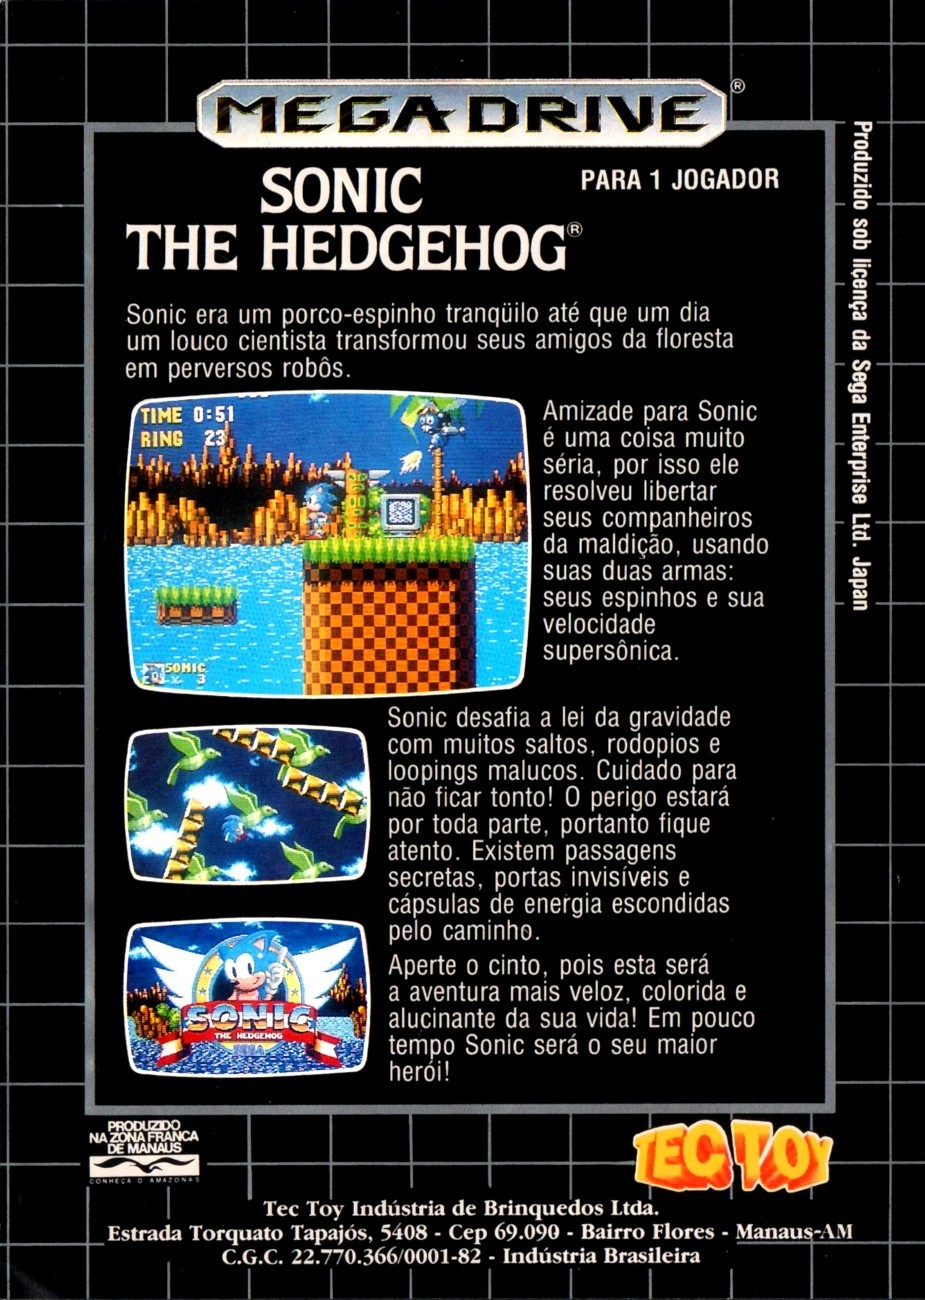 Sonic the Hedgehog cover